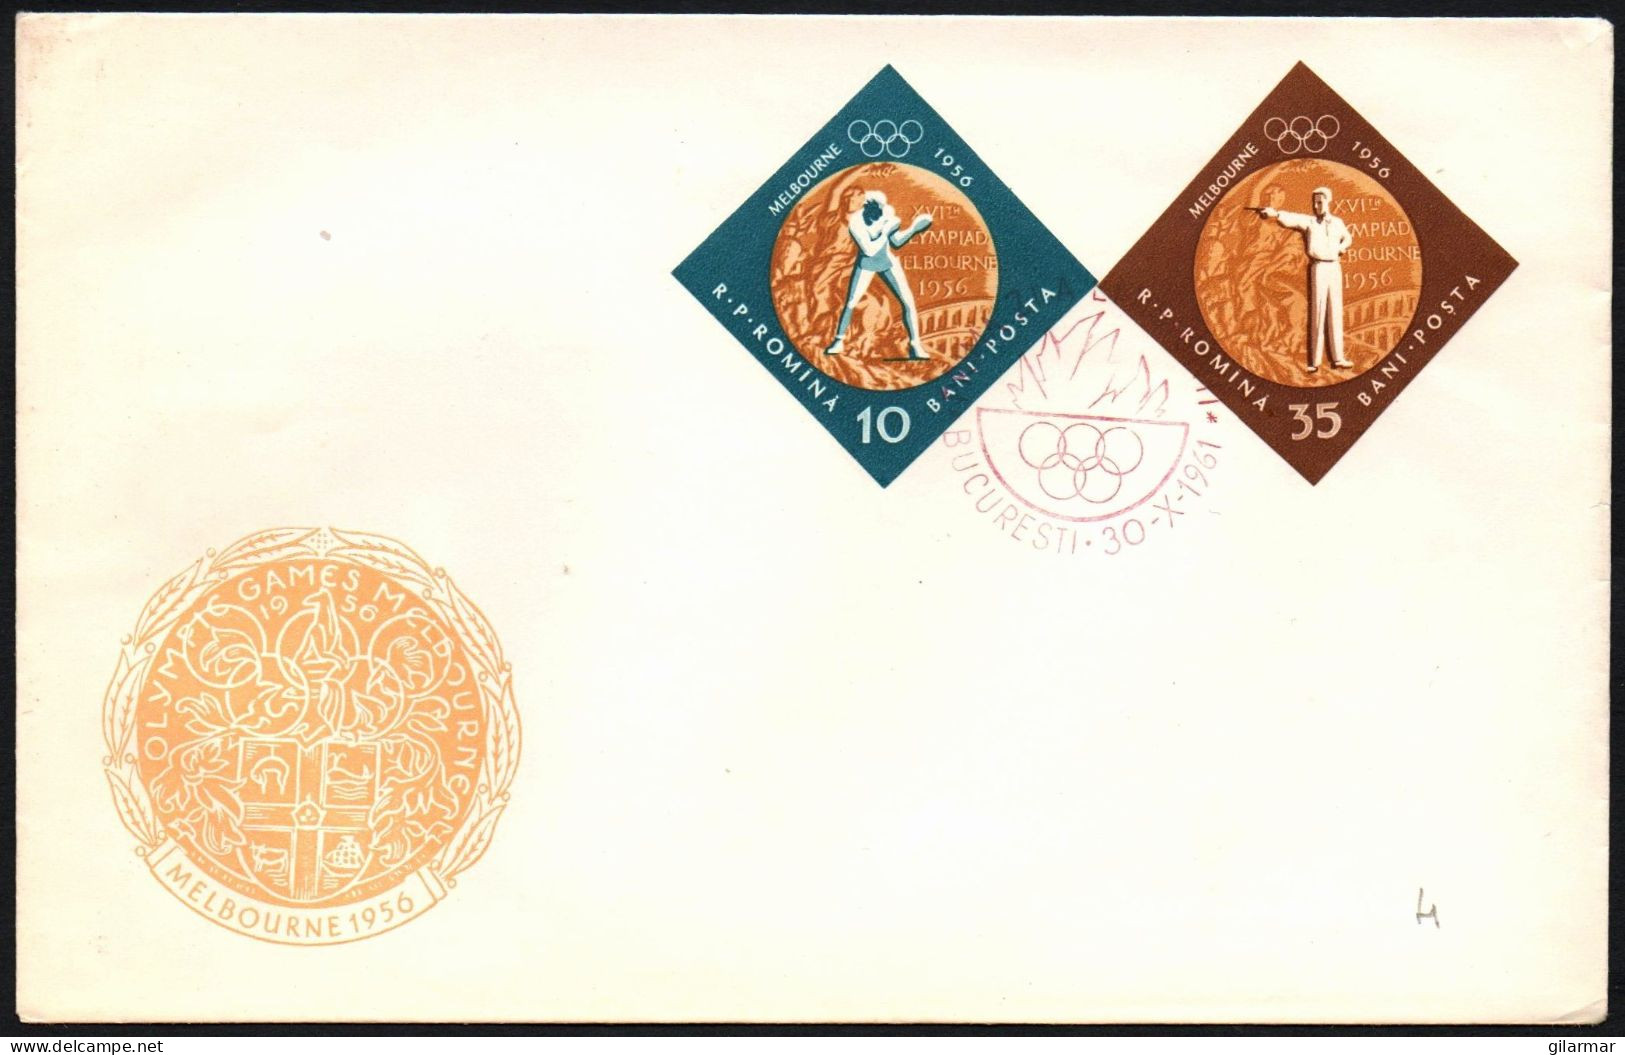 ROMANIA BUCHAREST 1961 - GOLD MEDALS AT THE OLYMPIC GAMES OF MELBOURNE '56 - FDC - BOXING / SHOOTING IMPERFORATED - G - Summer 1956: Melbourne